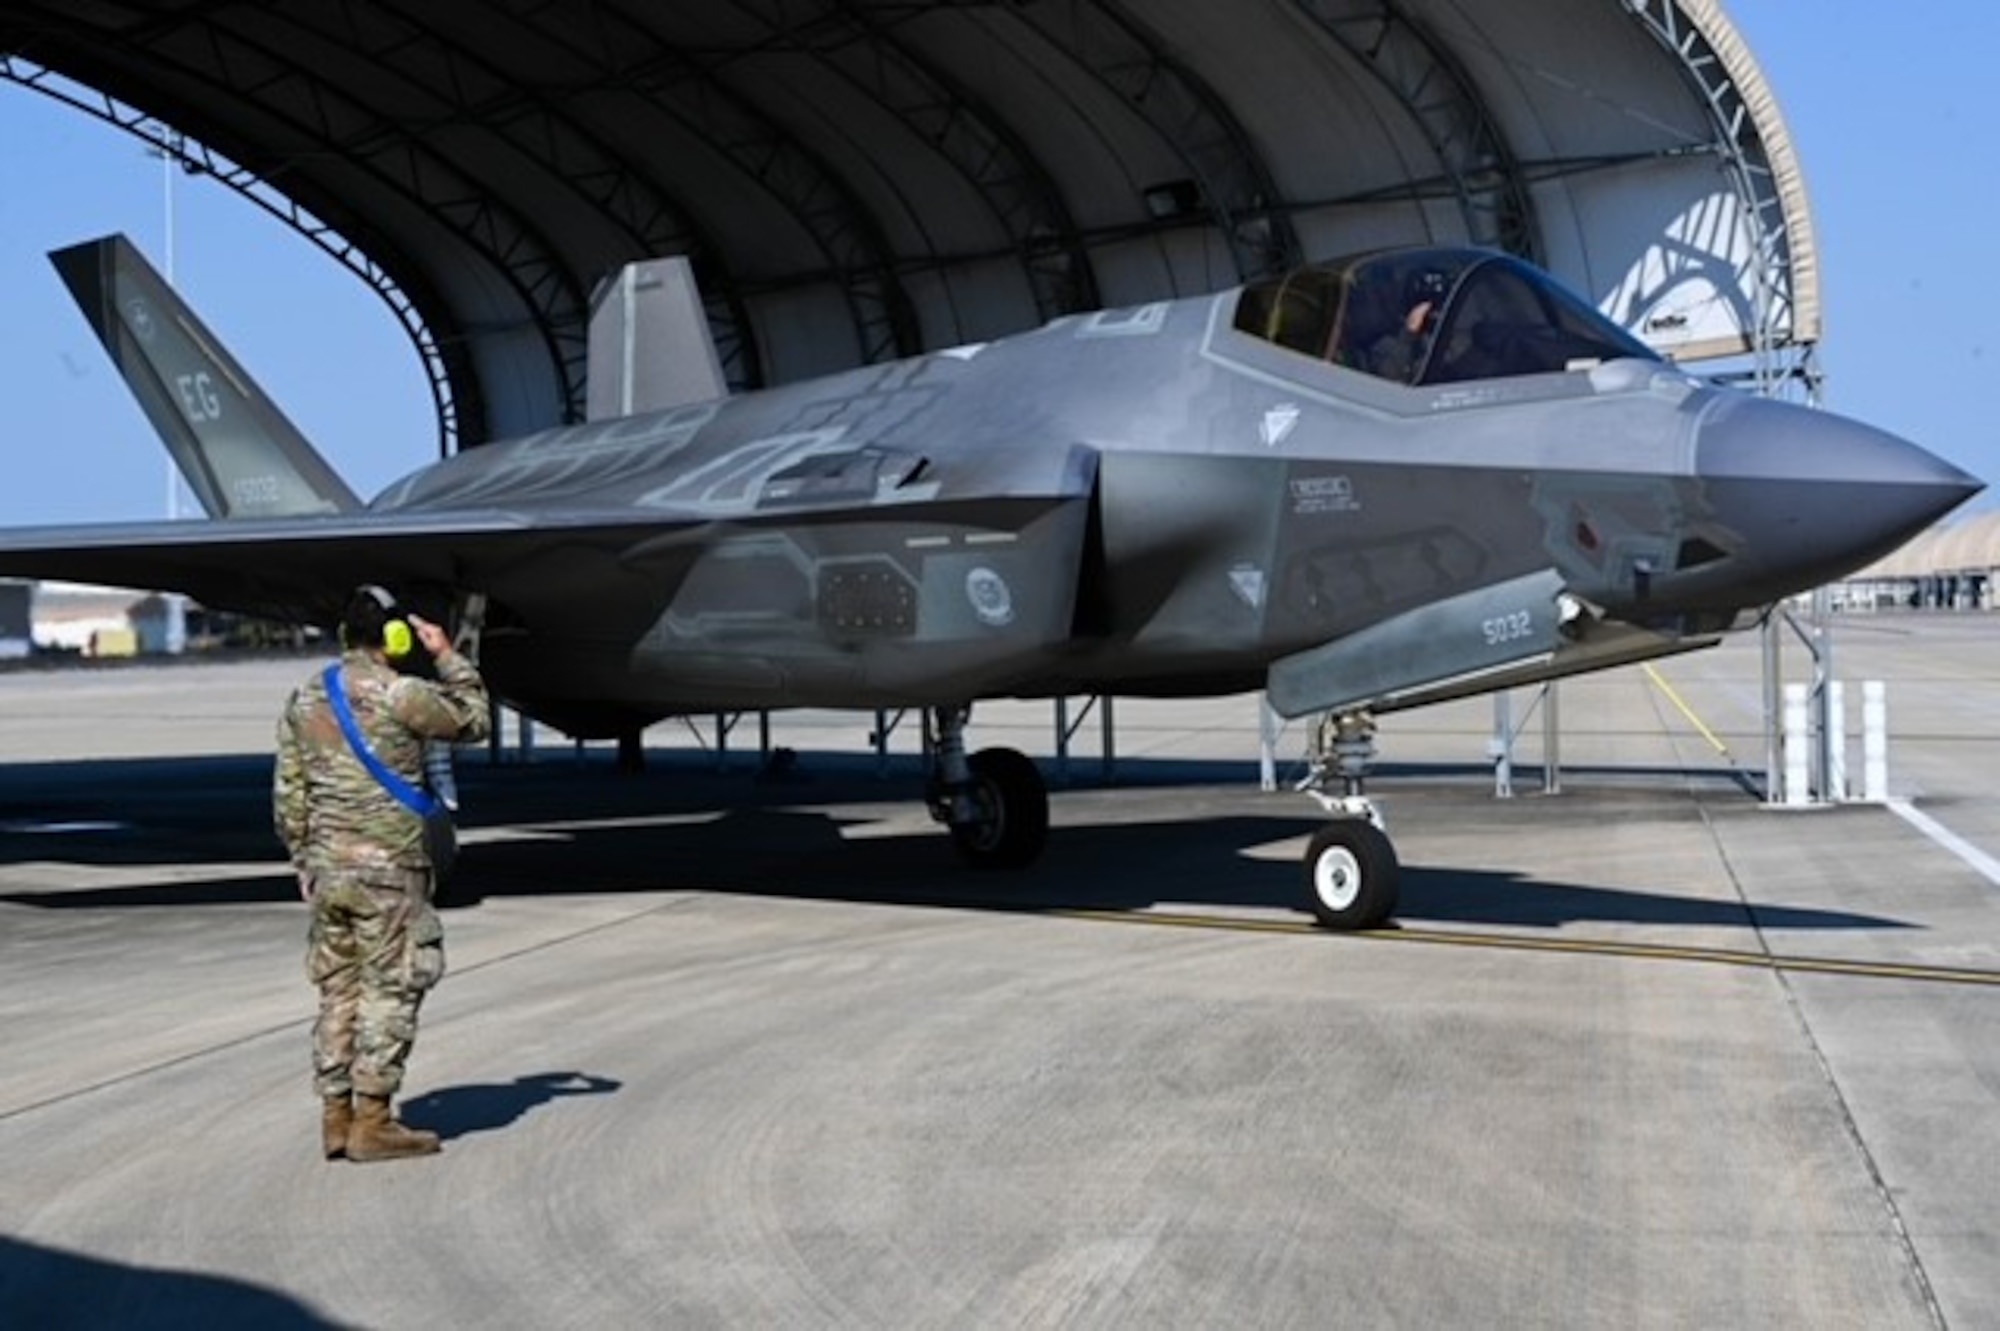 Brig. Gen. Michael T. Rawls readies to fly an F-35 Lightning II with the 65th Aggressor Squadron at Nellis AFB, Nev.